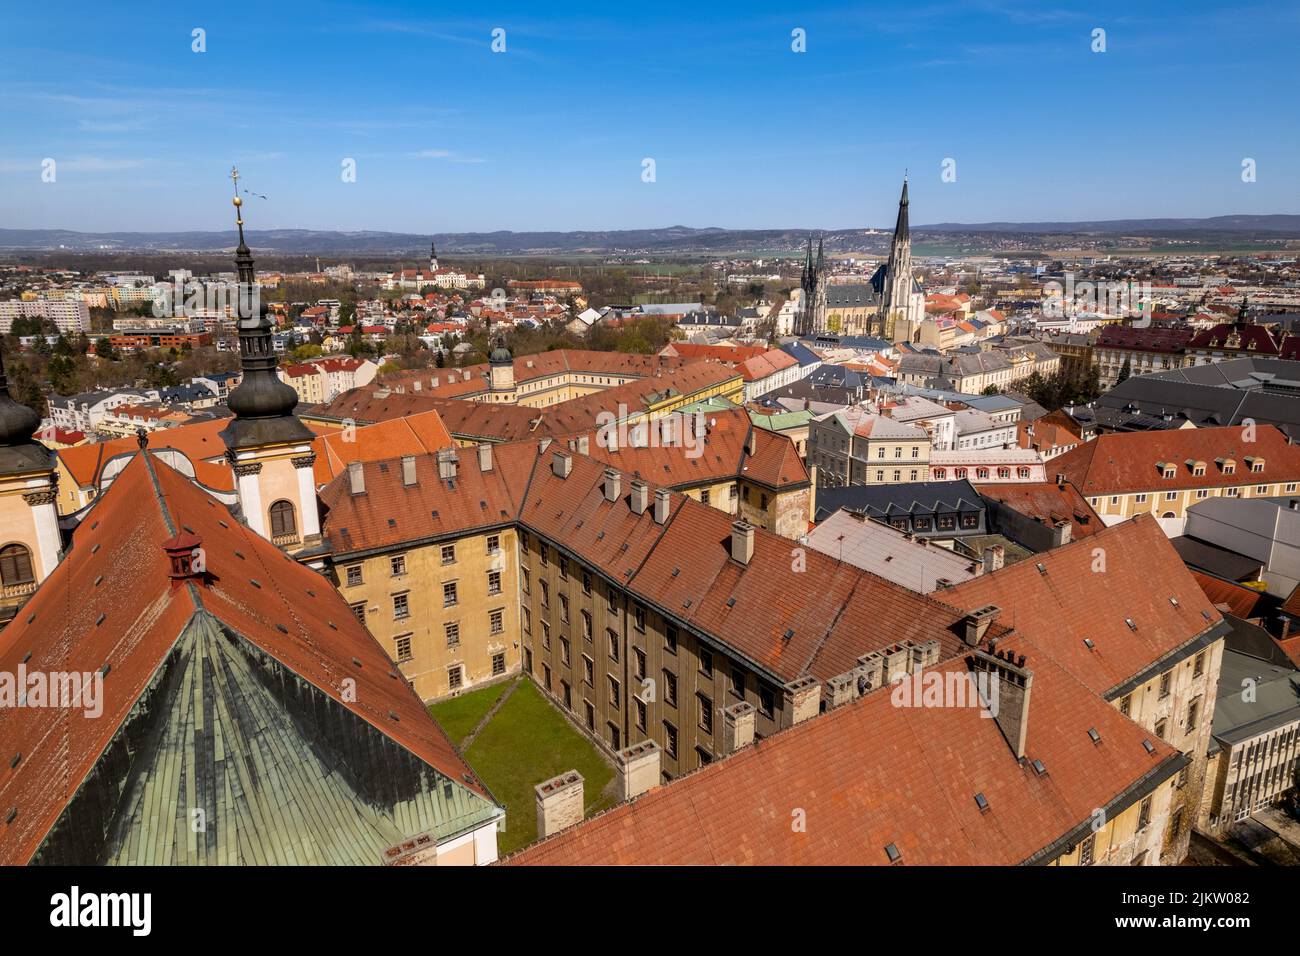 An aerial view of Olomouc city in the Czech Republic Stock Photo